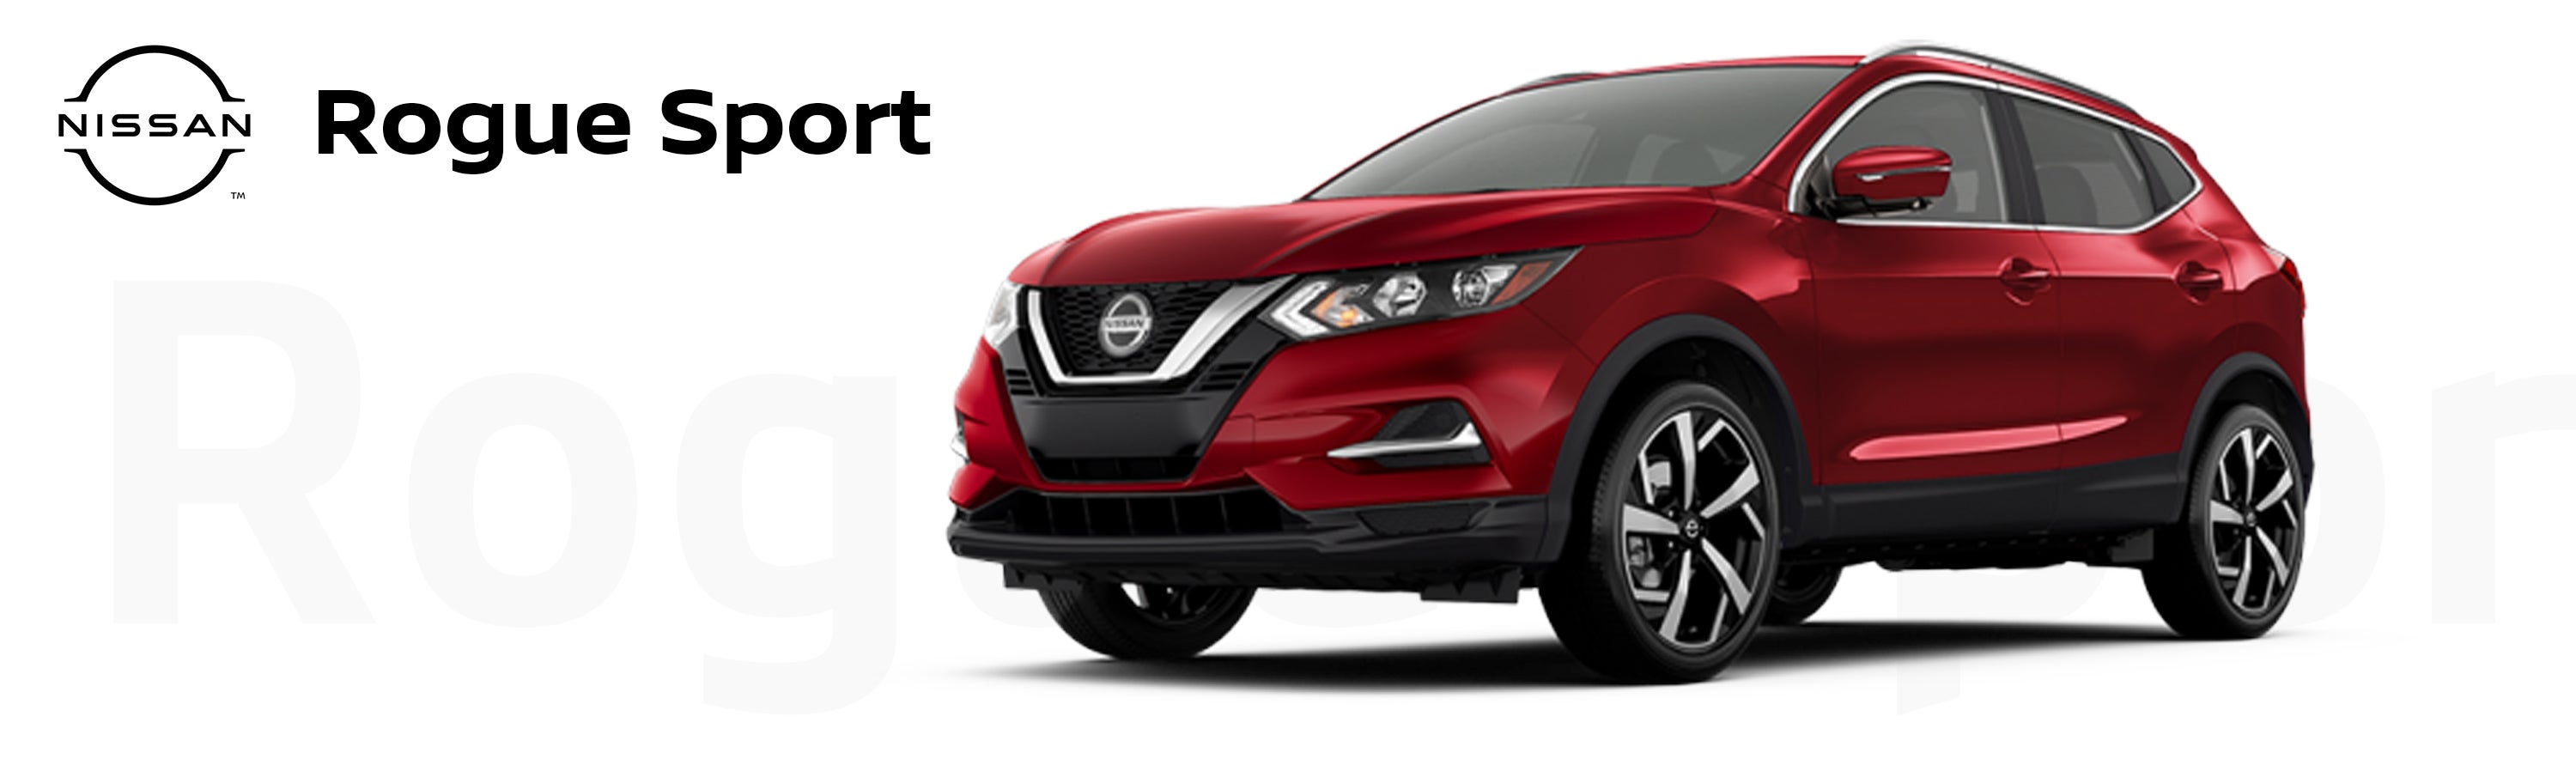 2020 Nissan Rogue Sport at Clay Cooley Nissan of Irving in Irving TX